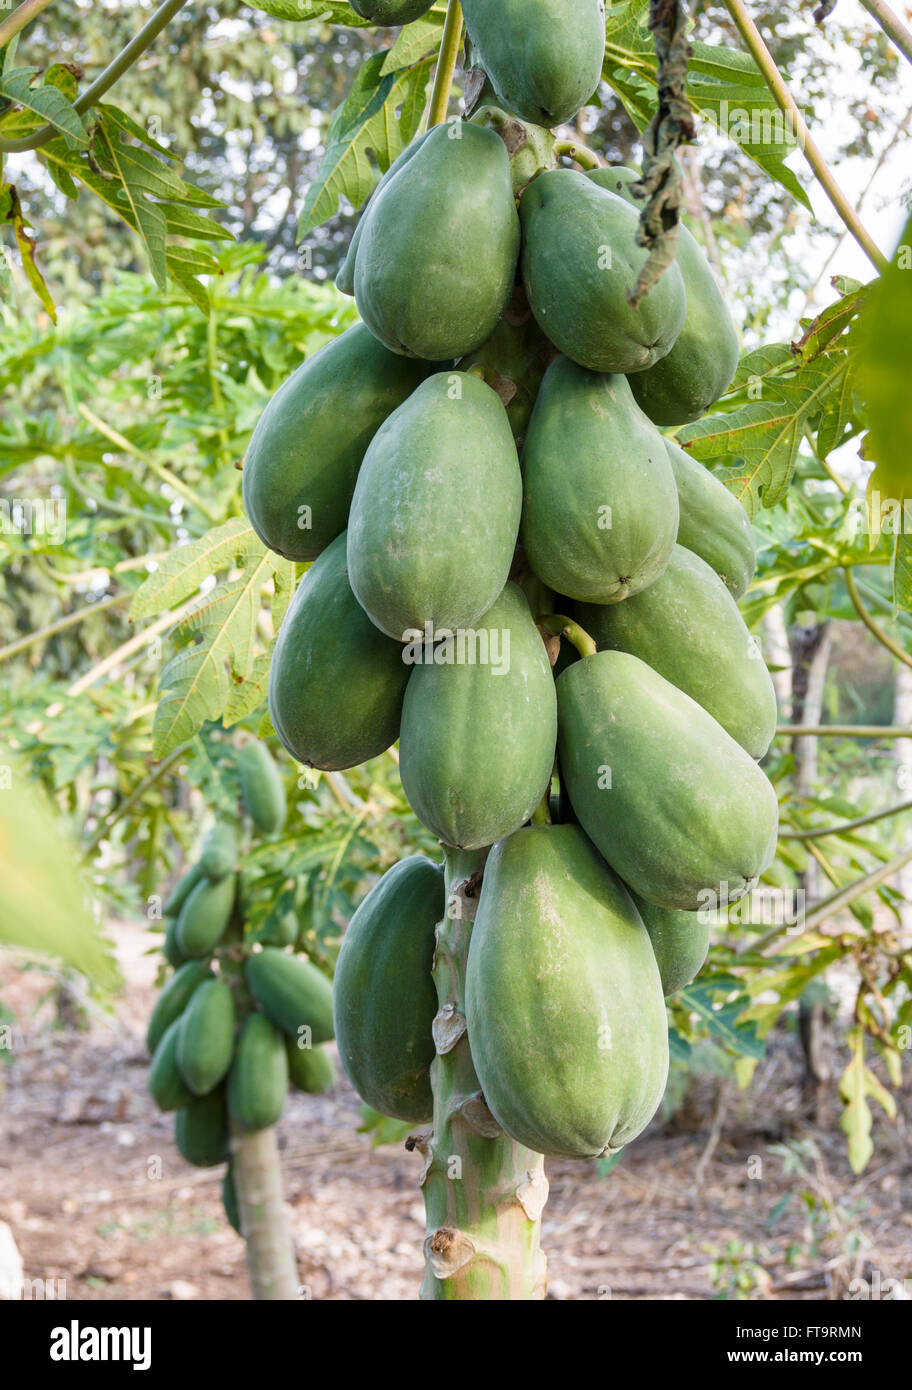 Abundant Papayas on the Trees. Large green papayas ripen on the stem of a papaya tree in a row of trees in a young orchard Stock Photo